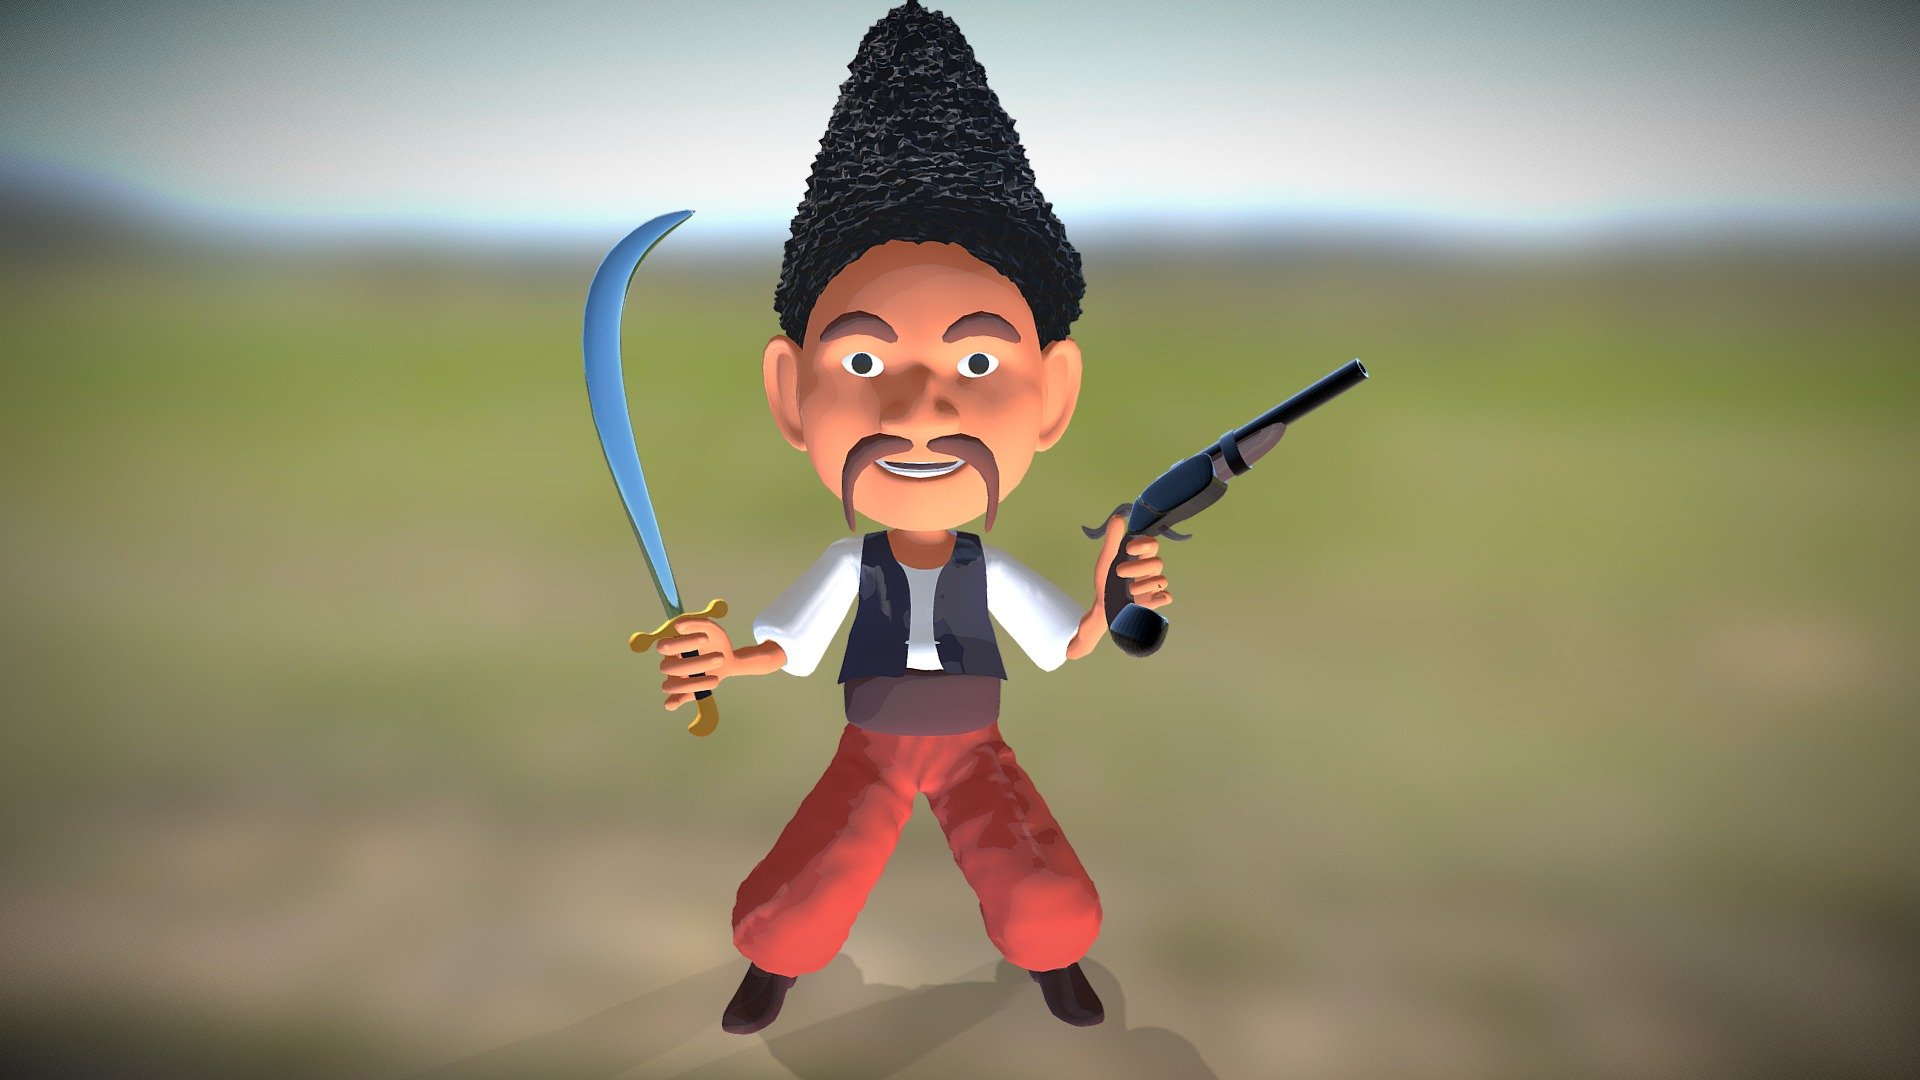 Cossack Character Animated - Low Poly

Optimized for games (game ready), Suitable for close-UPS, illustrations and various renderings 3d model